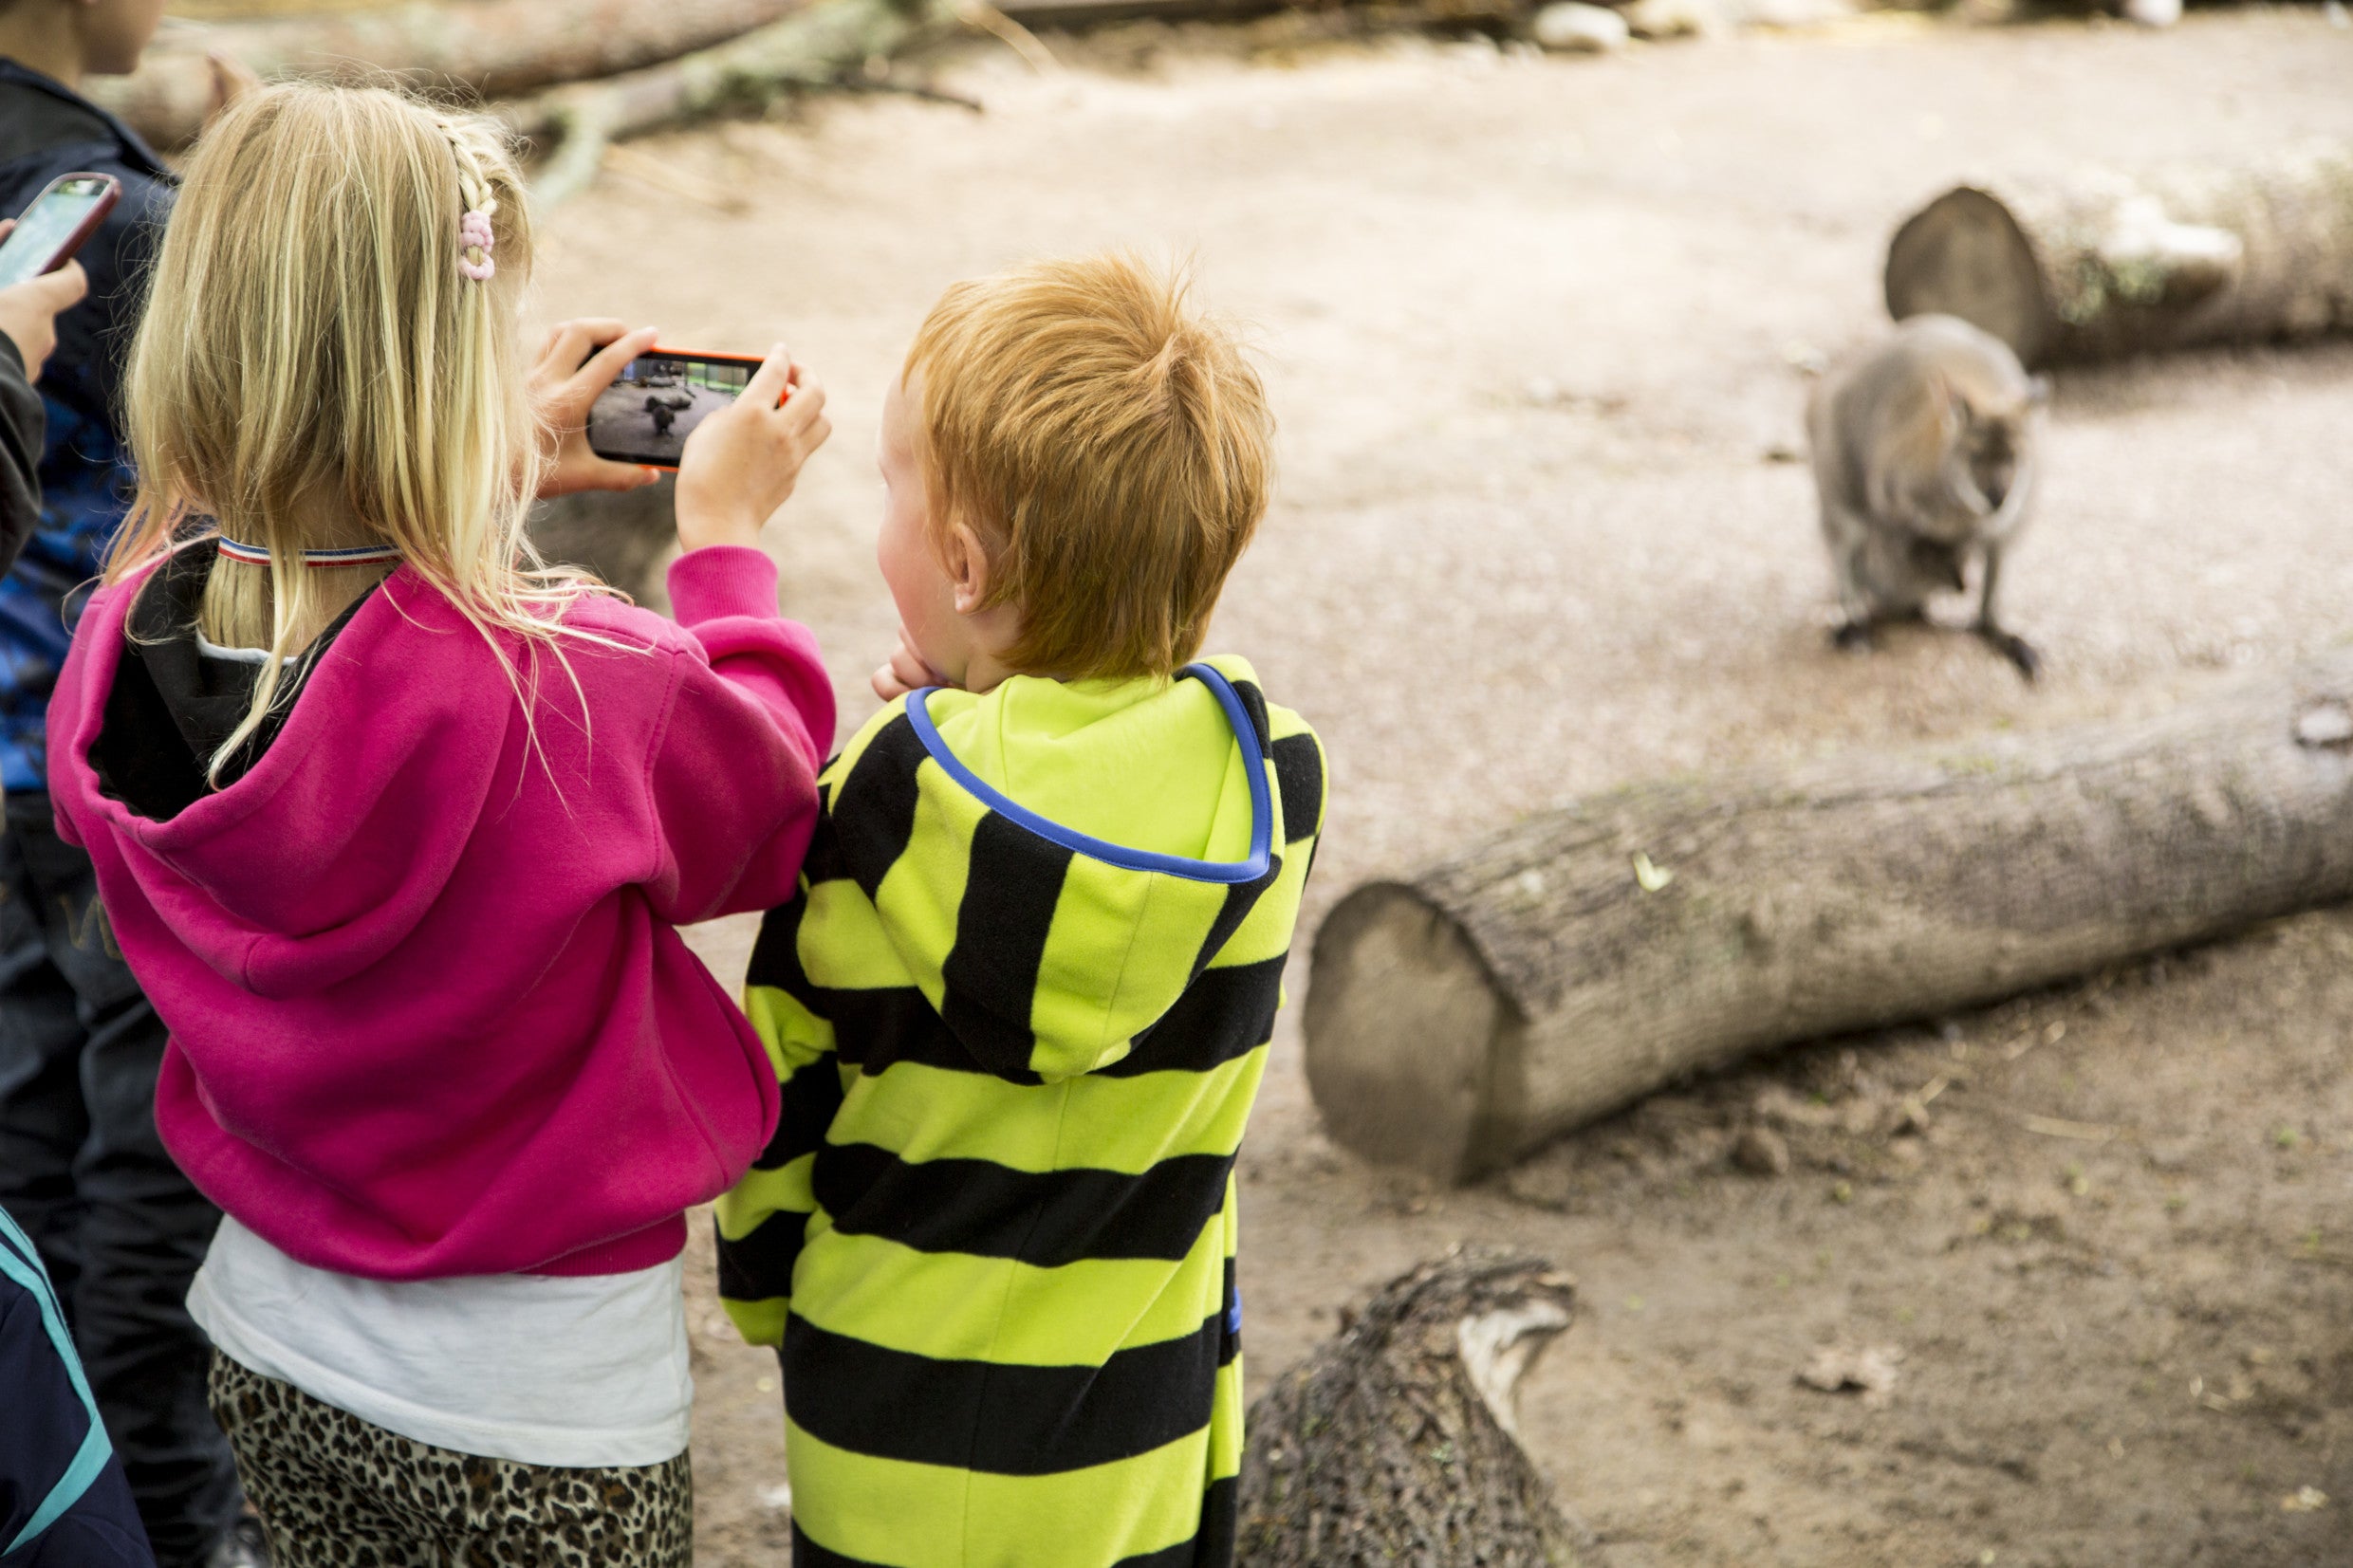 The Zoo in Helsinki is a great place for kids to enjoy the animals and run off some energy. (Photo courtesy of Mari Lehmonen)